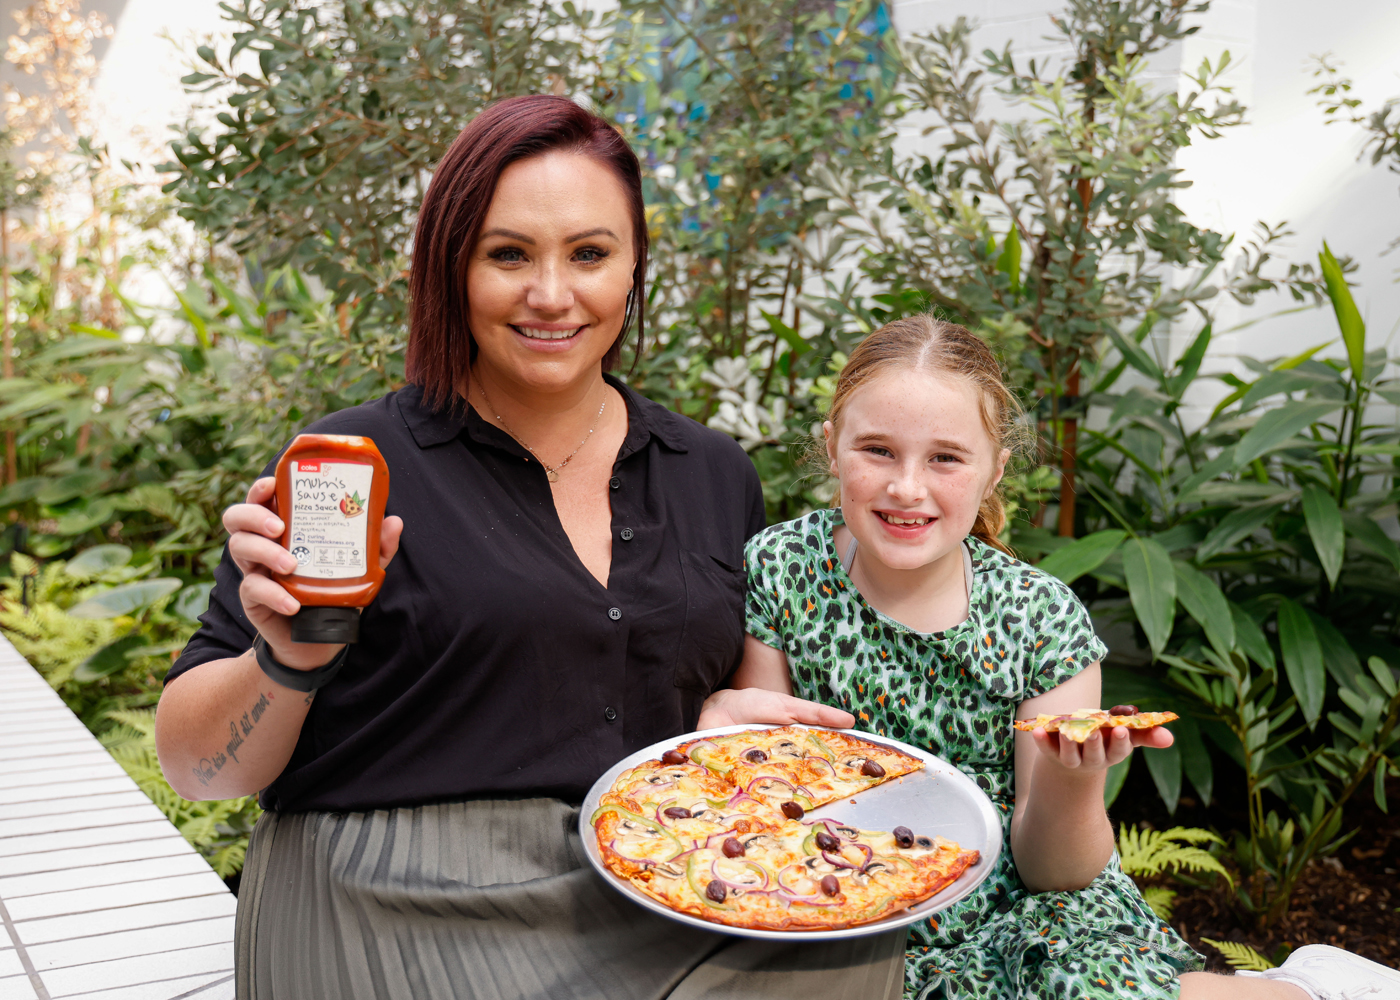 Nine year-old Indy who has Partial Complex Cognitive Epilepsy with her mum holding a bottle of Mum's Sause